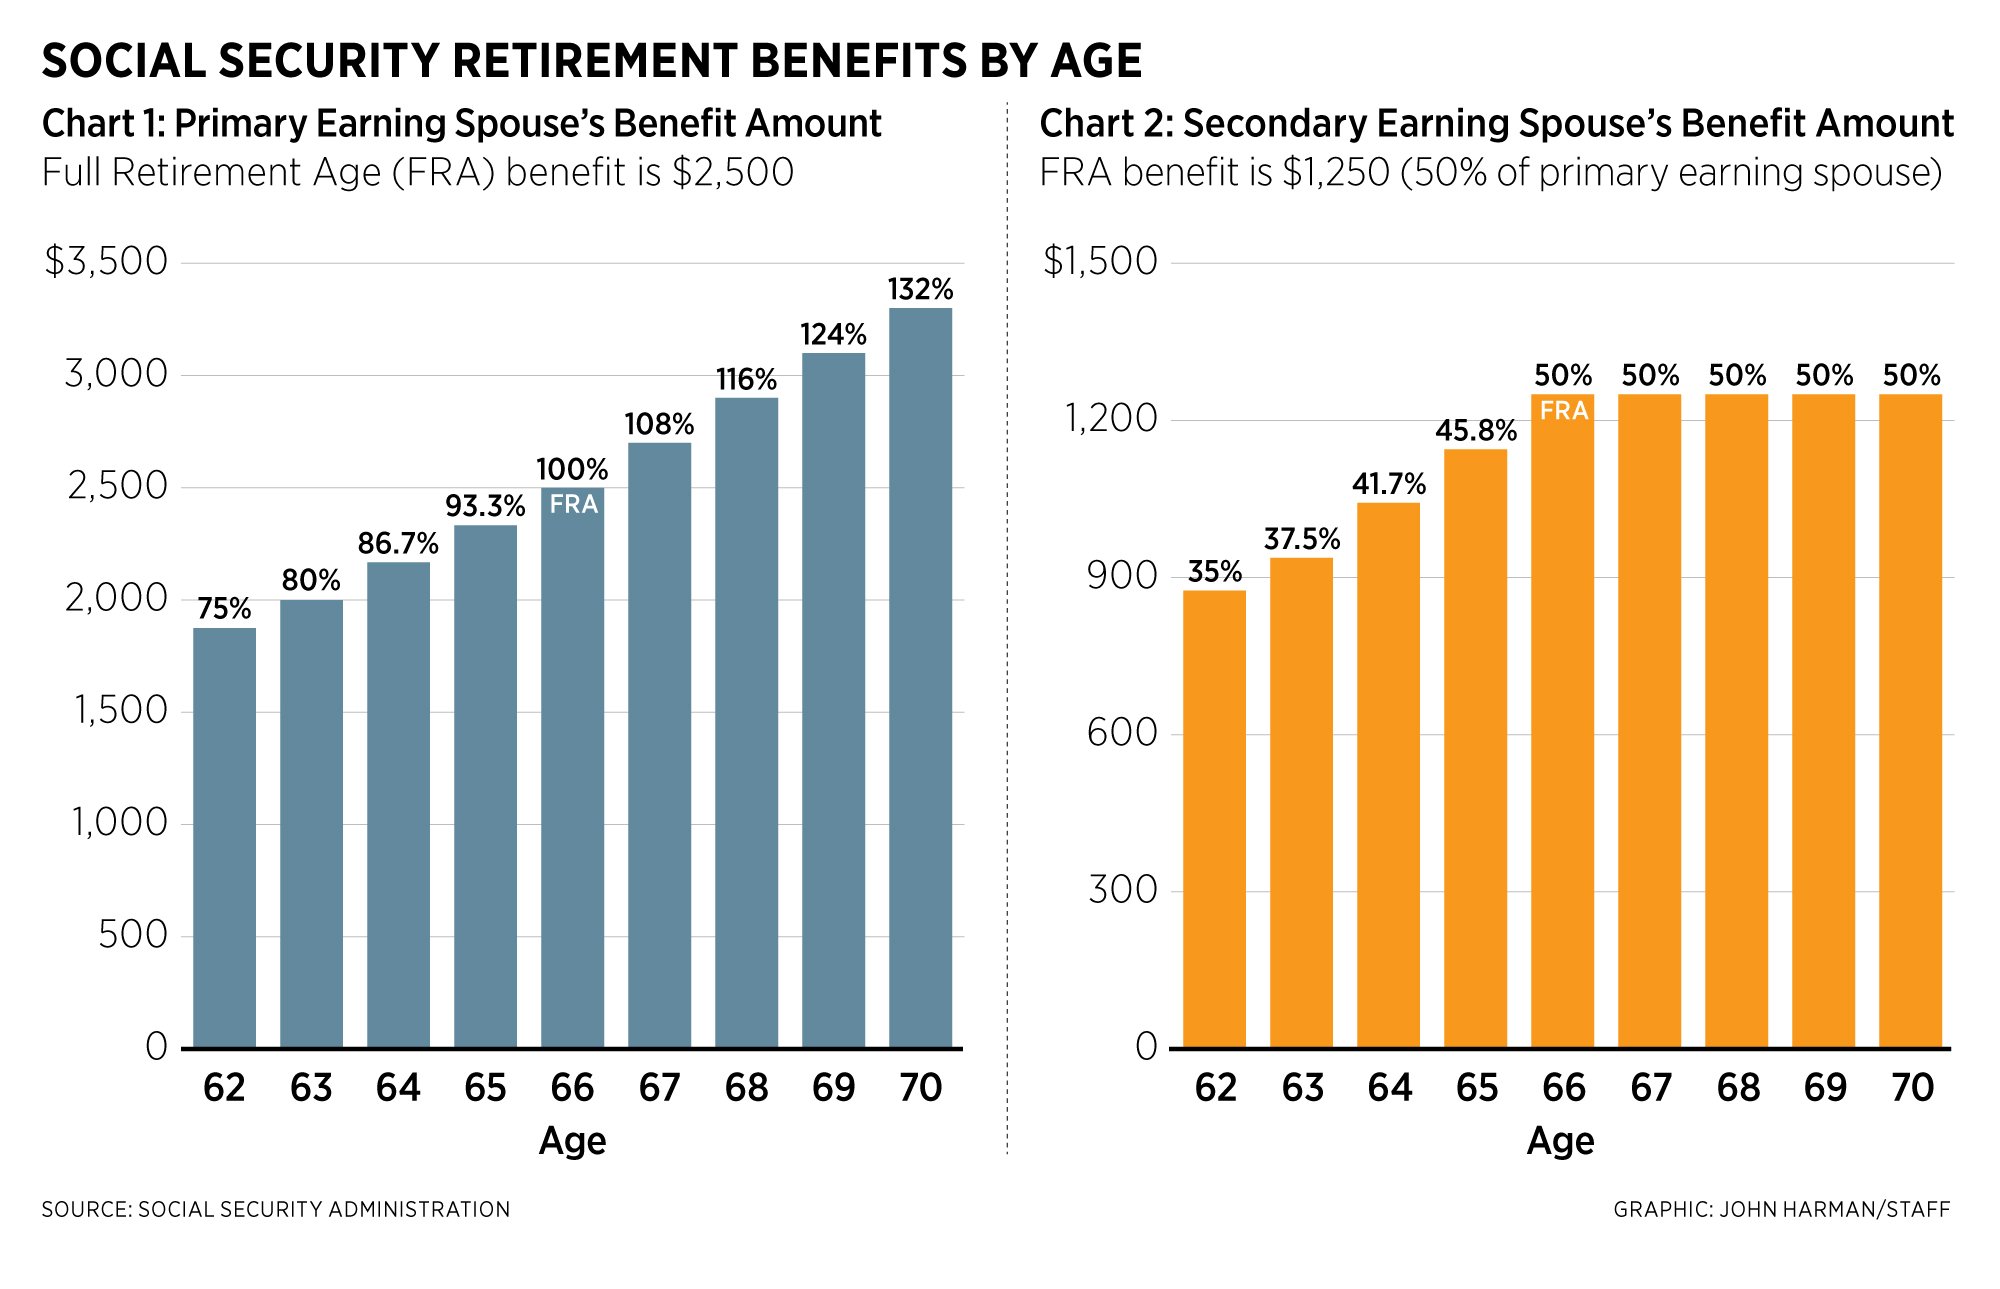 MOAA When It Comes to Social Security Retirement Benefits, Timing Matters